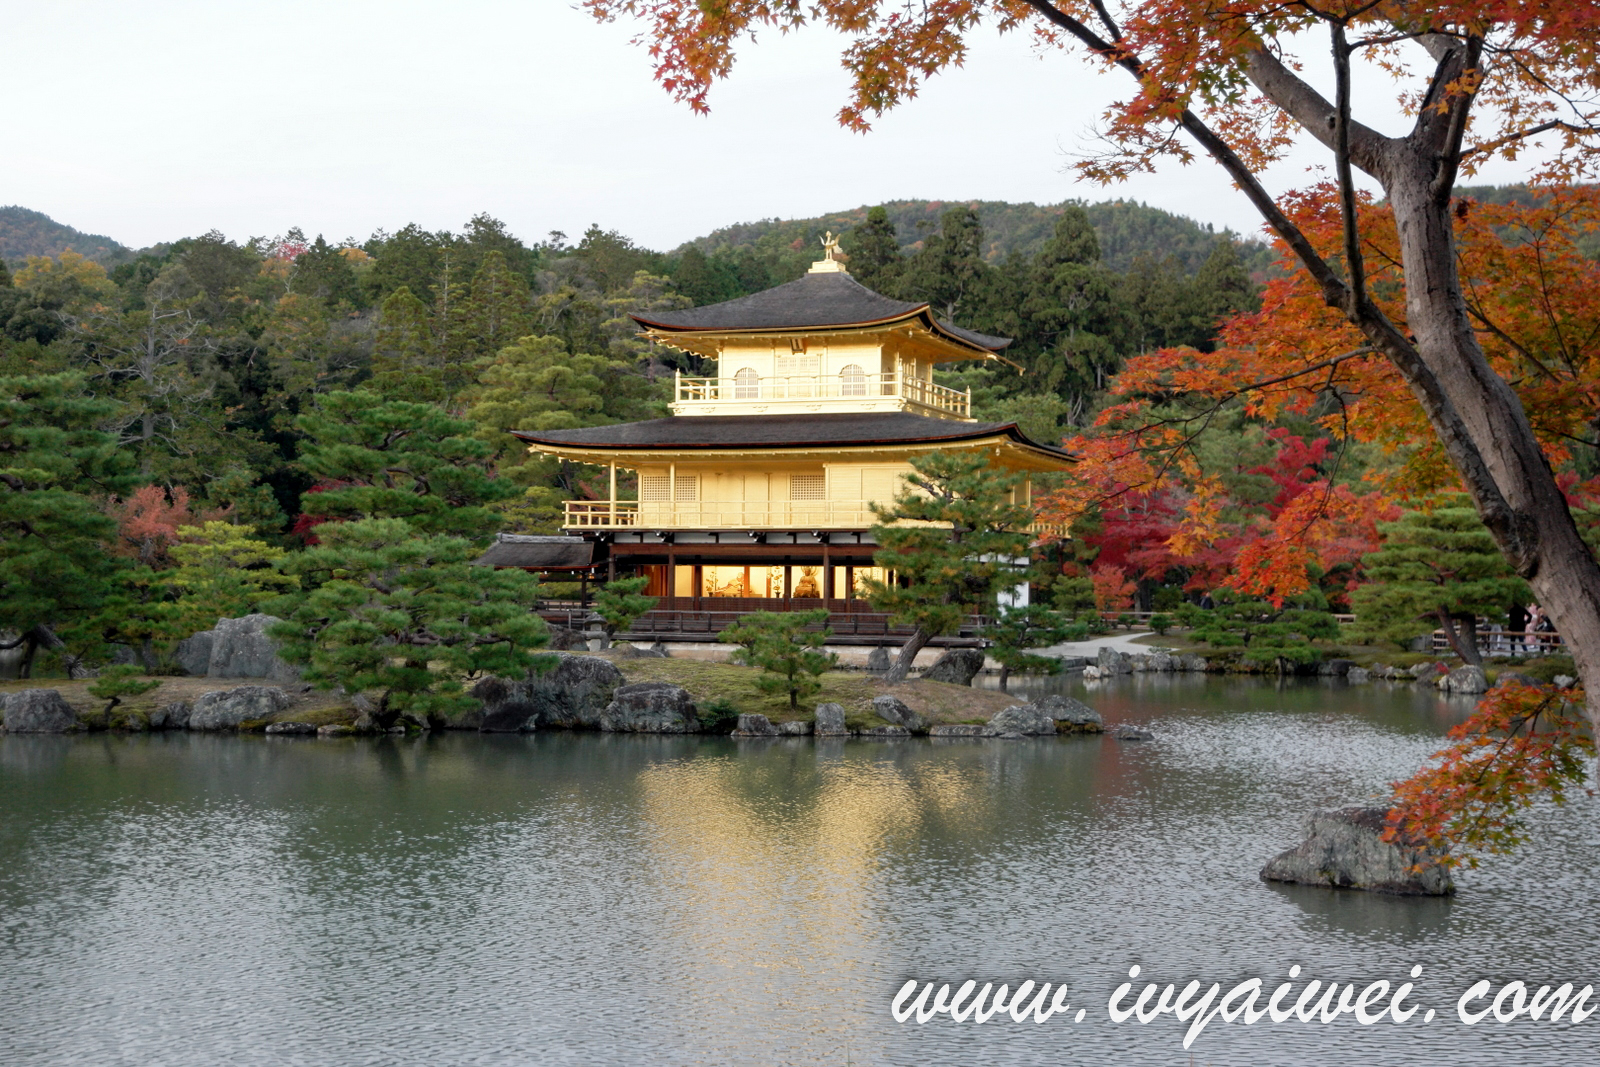 Things to do in Kyoto (Autumn)